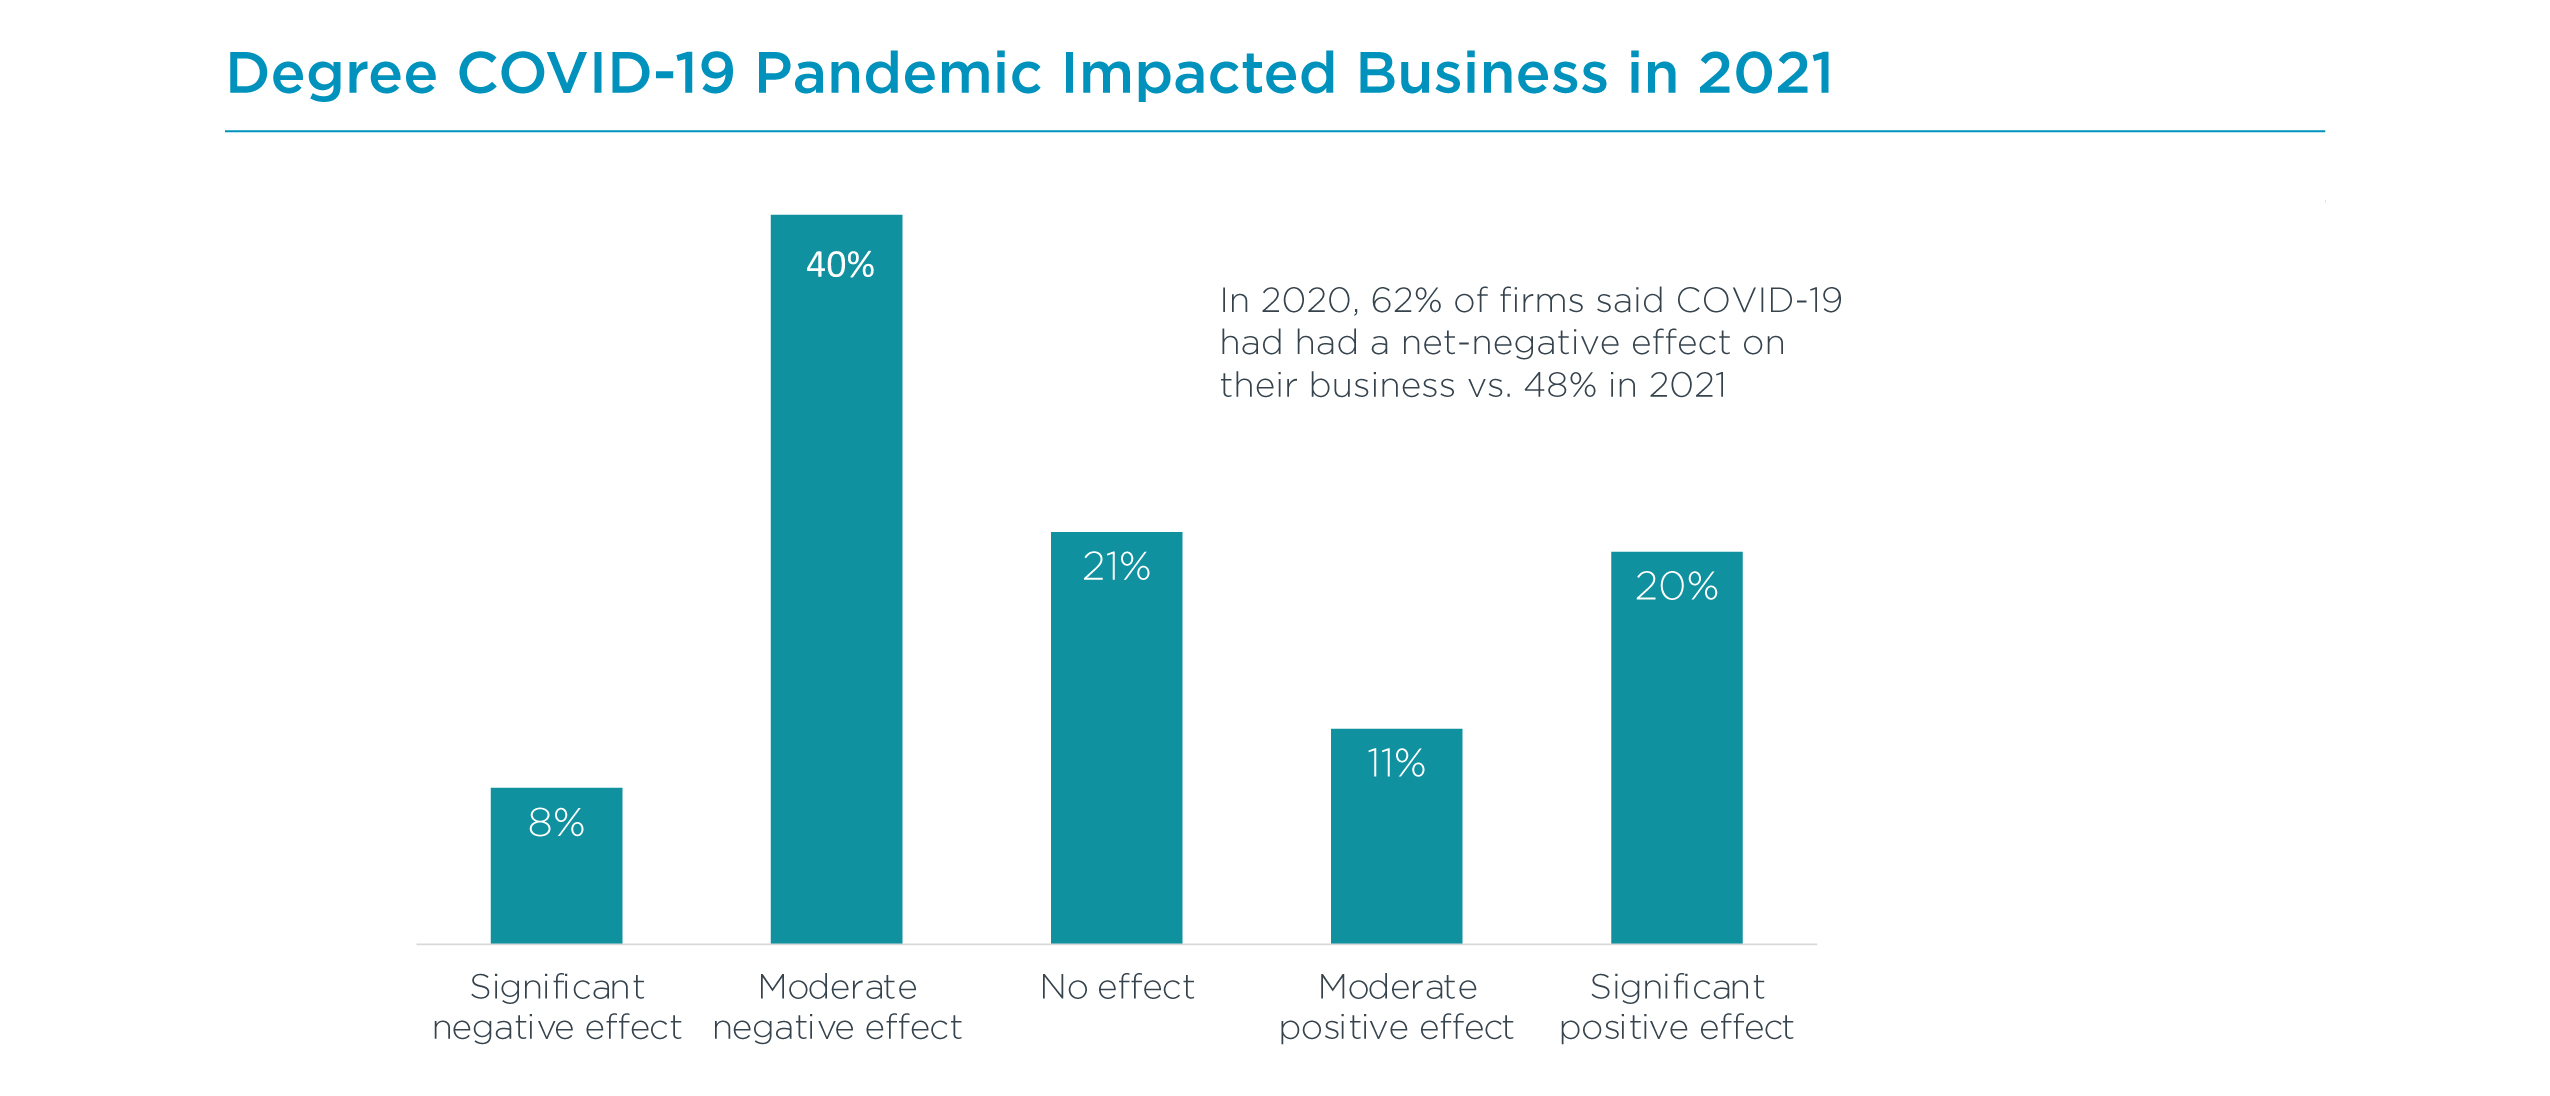 Degree COVID-19 Pandemic Impacted Business in 2021